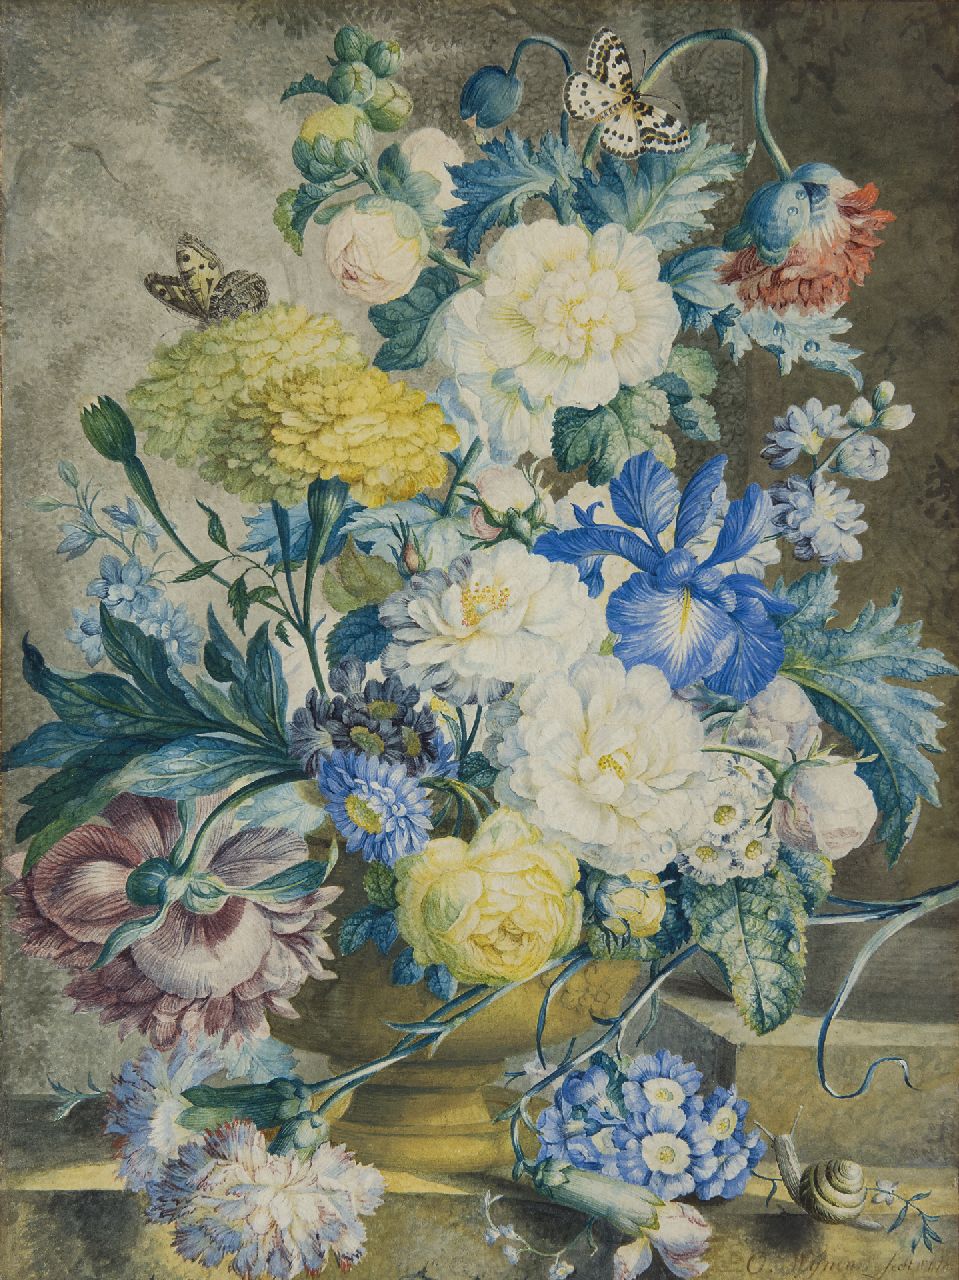 Oswald Wijnen | A flower still life, watercolour on paper, 40.6 x 30.1 cm, signed l.r. and dated 1778